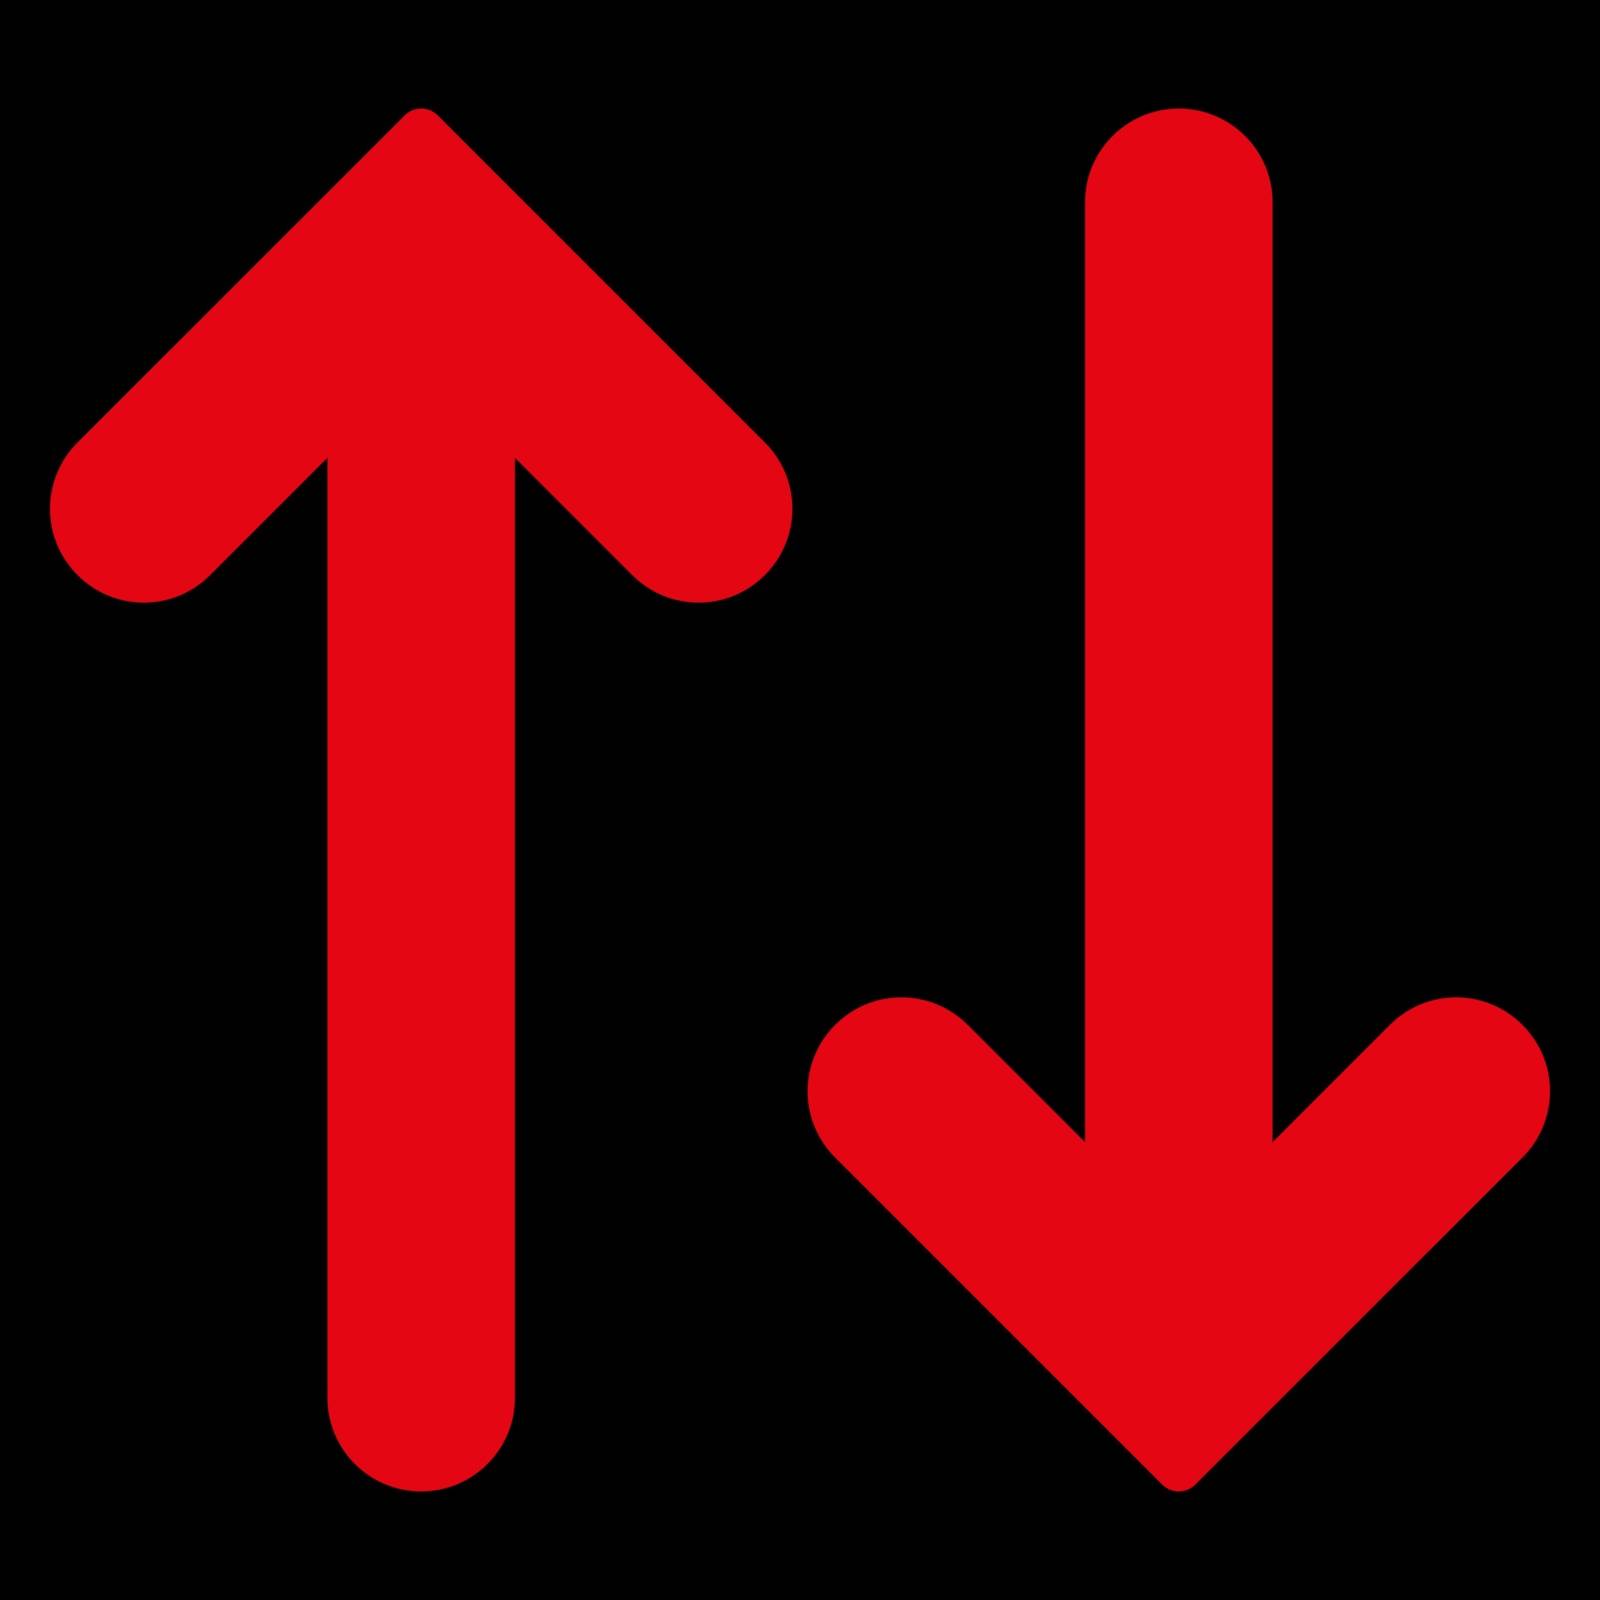 Flip Vertical icon from Primitive Set. This isolated flat symbol is drawn with red color on a black background, angles are rounded.